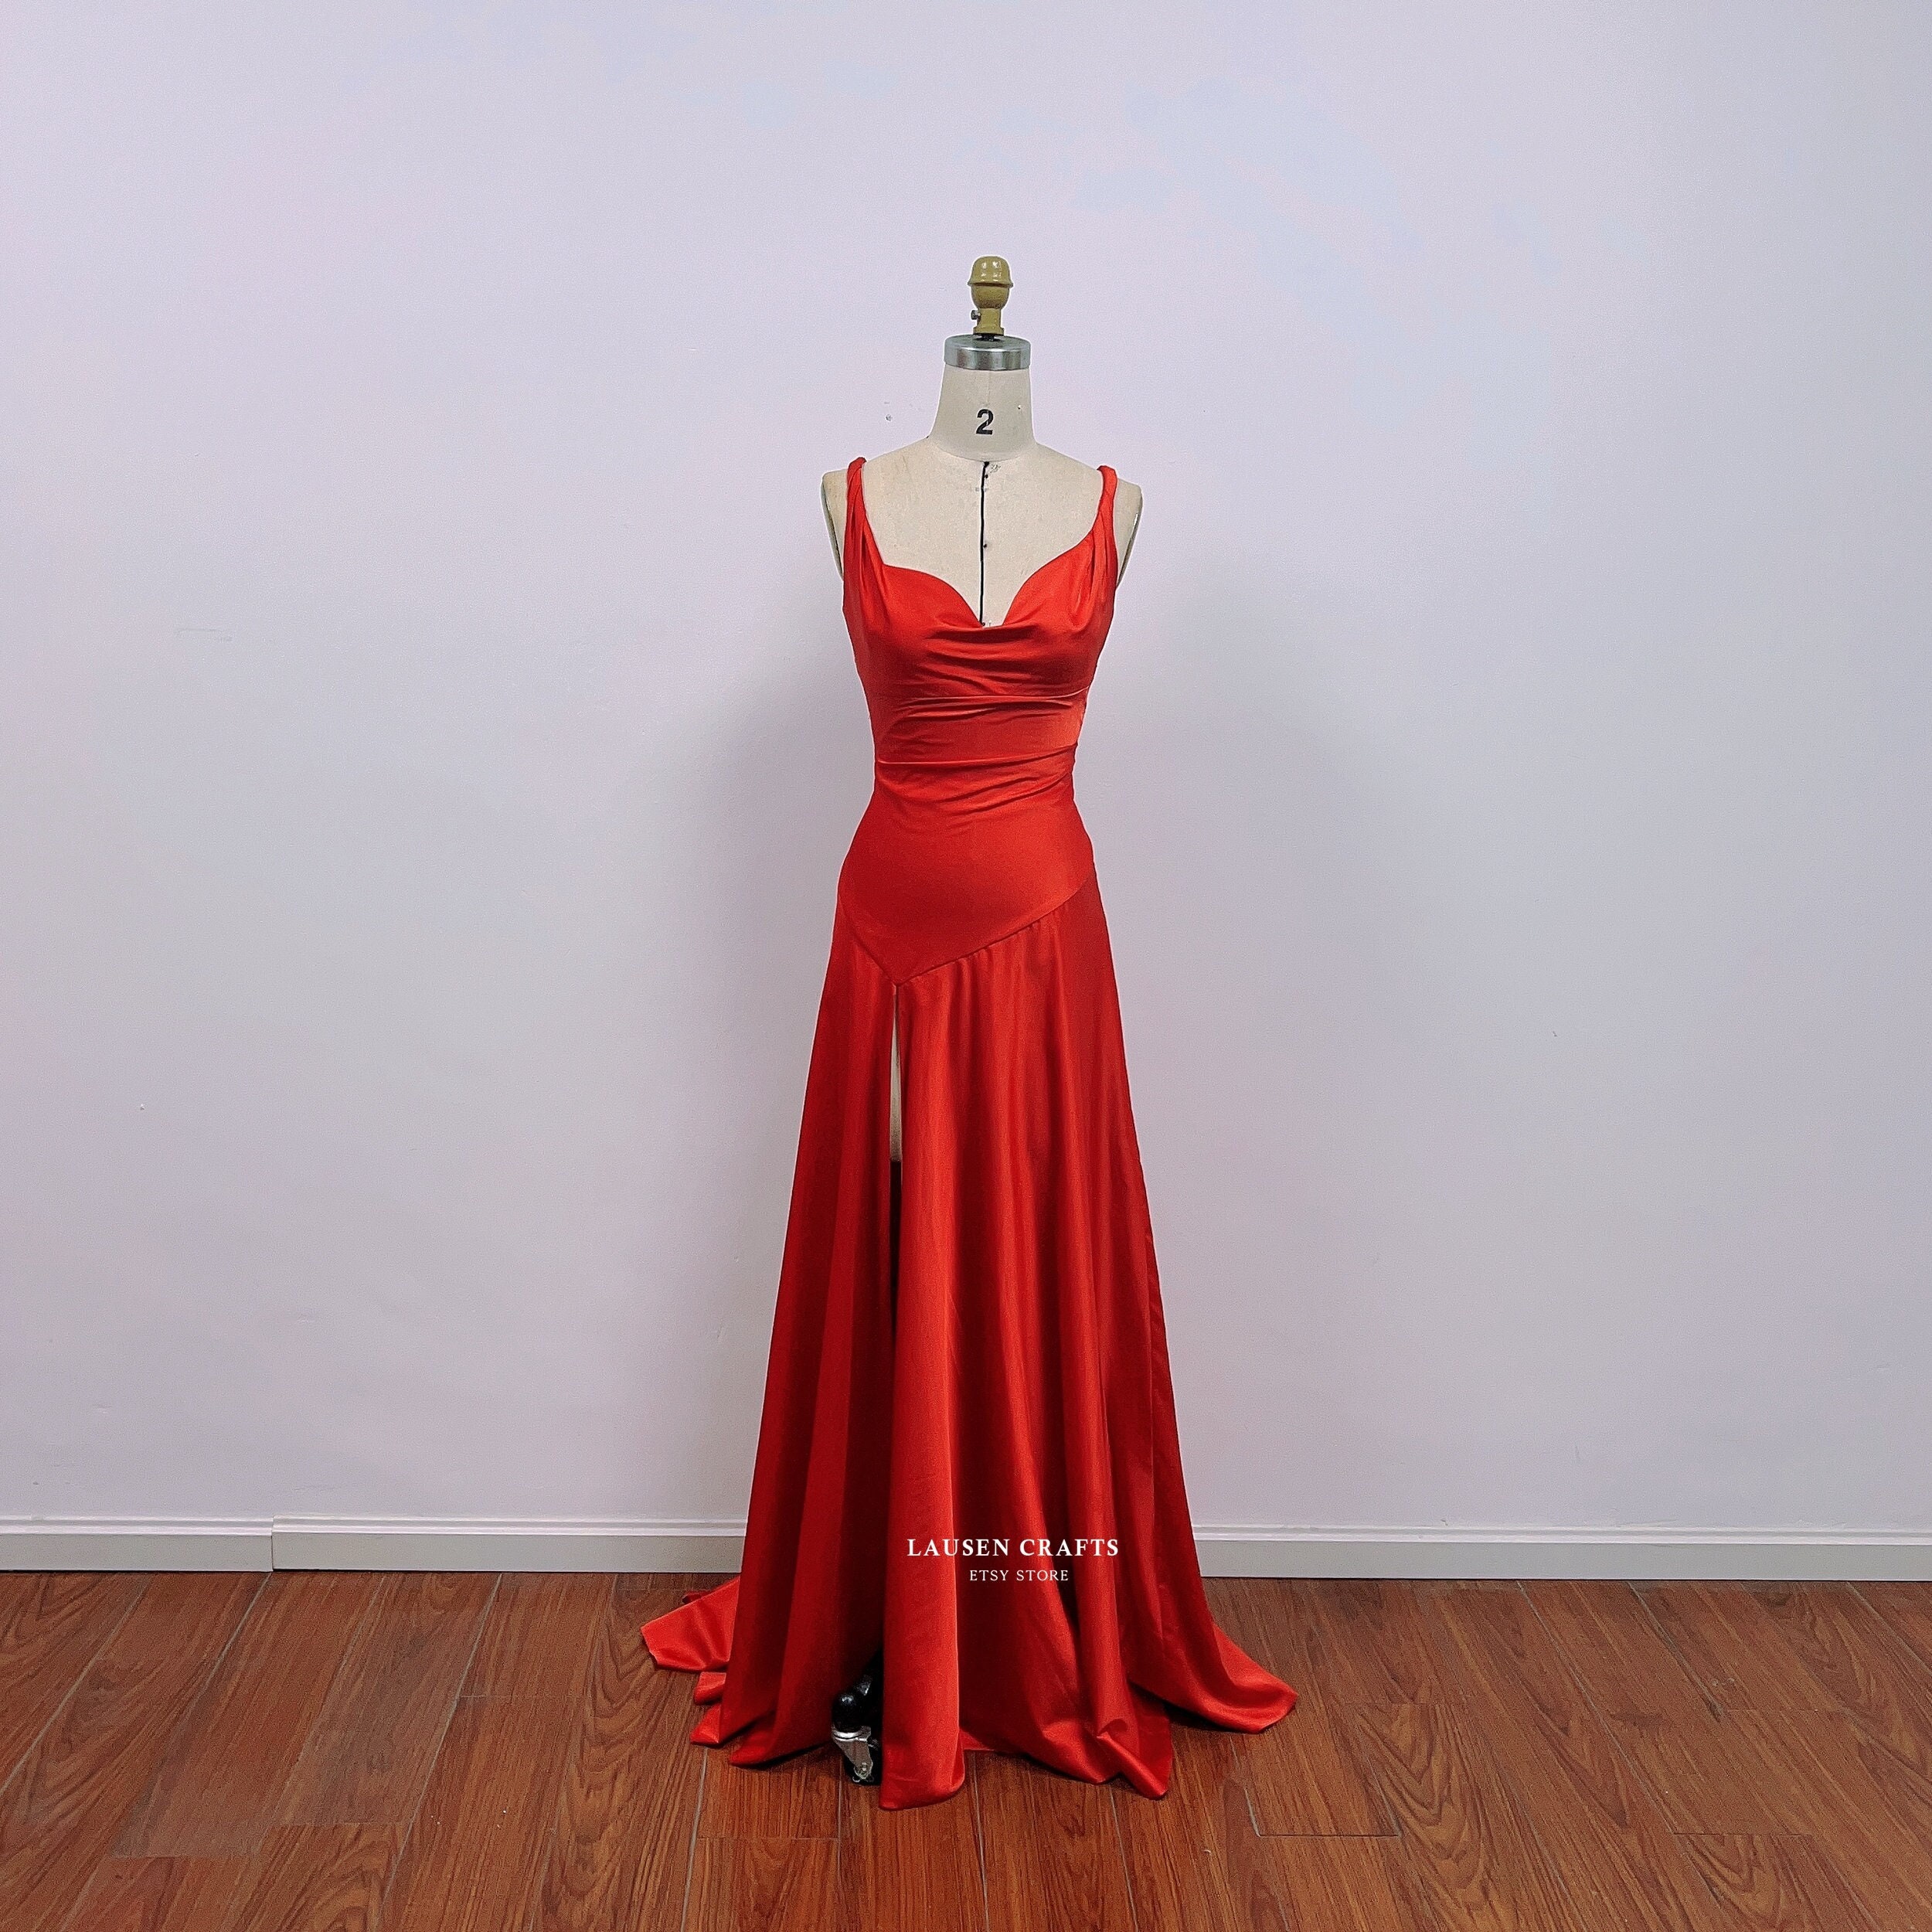 Women's vibrant red satin bodice evening gown with floral printed rich satin  skirt